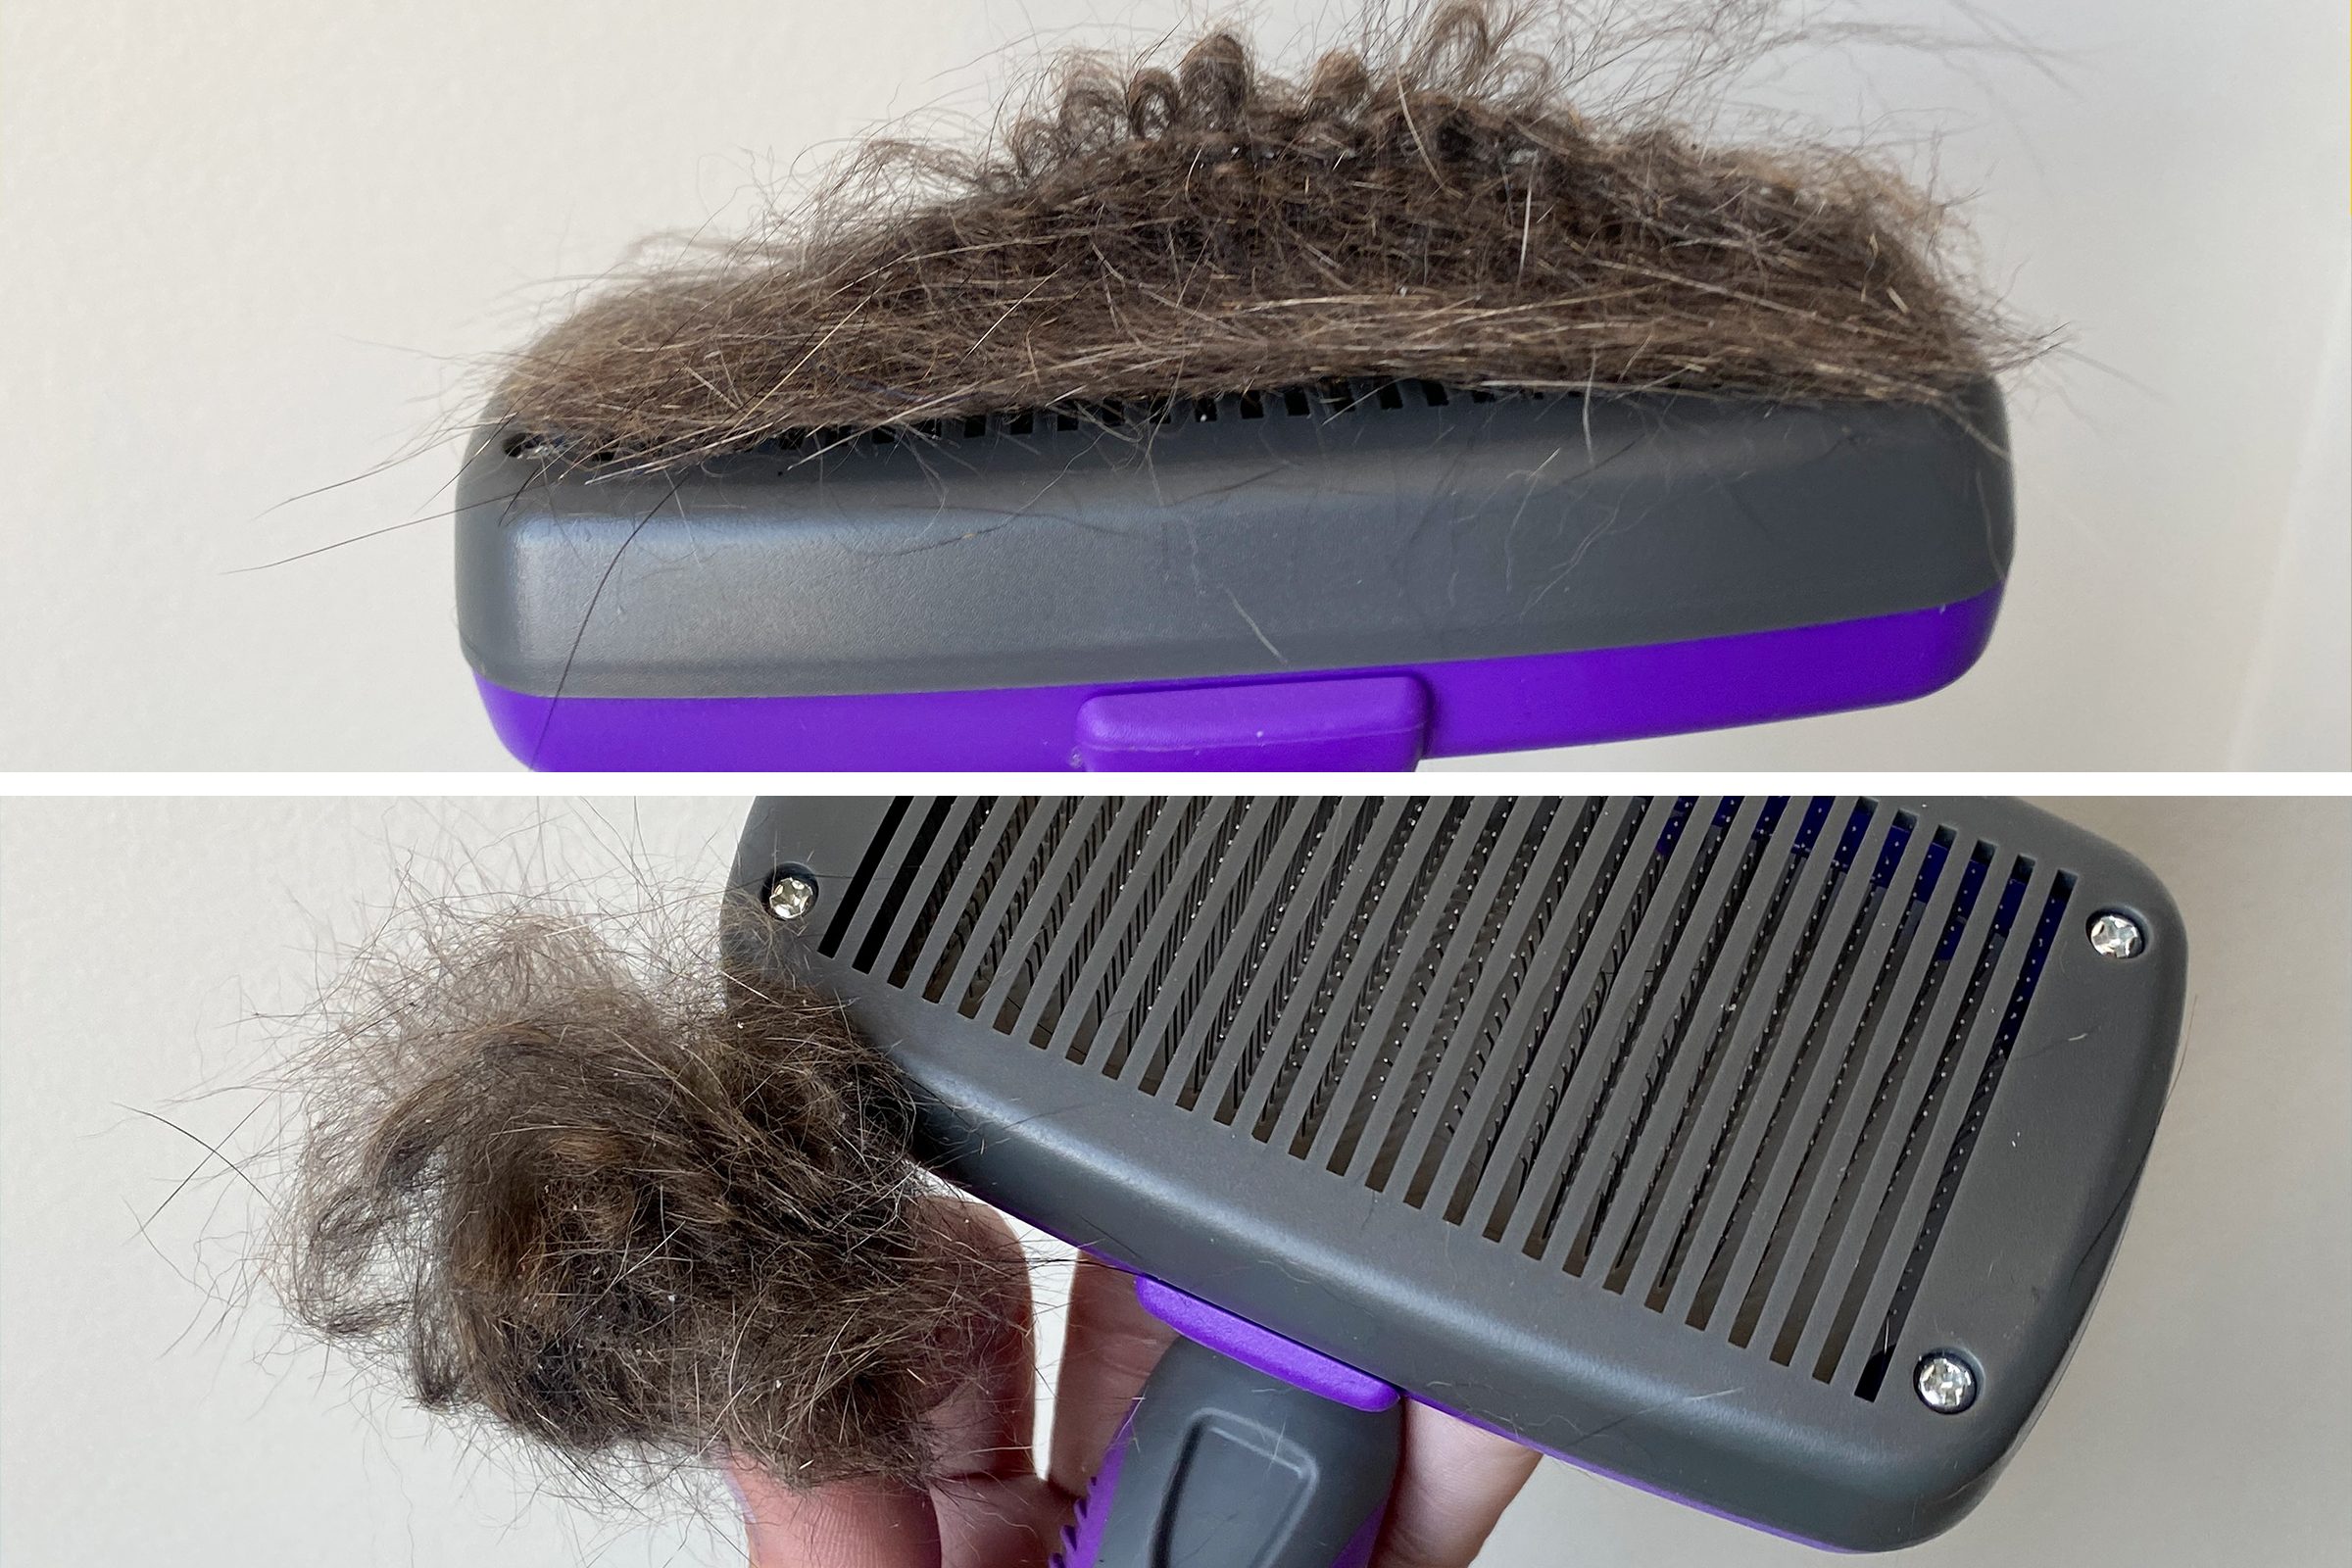 https://www.familyhandyman.com/wp-content/uploads/2023/06/FHM-split-screen-before-and-after-Hertzko-Pet-Brush-Allison-Robicelli-for-FHM.jpg?fit=680%2C454